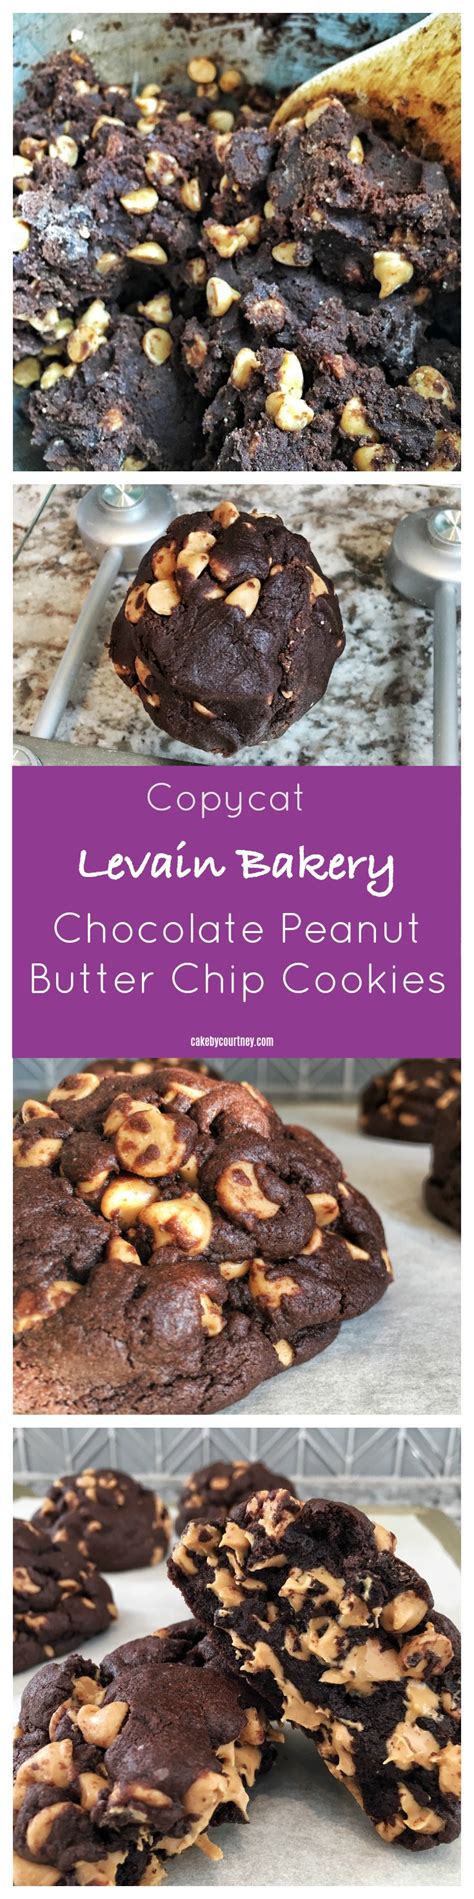 These are the best peanut butter chocolate chip cookies! Copycat Levain Bakery Chocolate Peanut Butter Chip Cookies ...